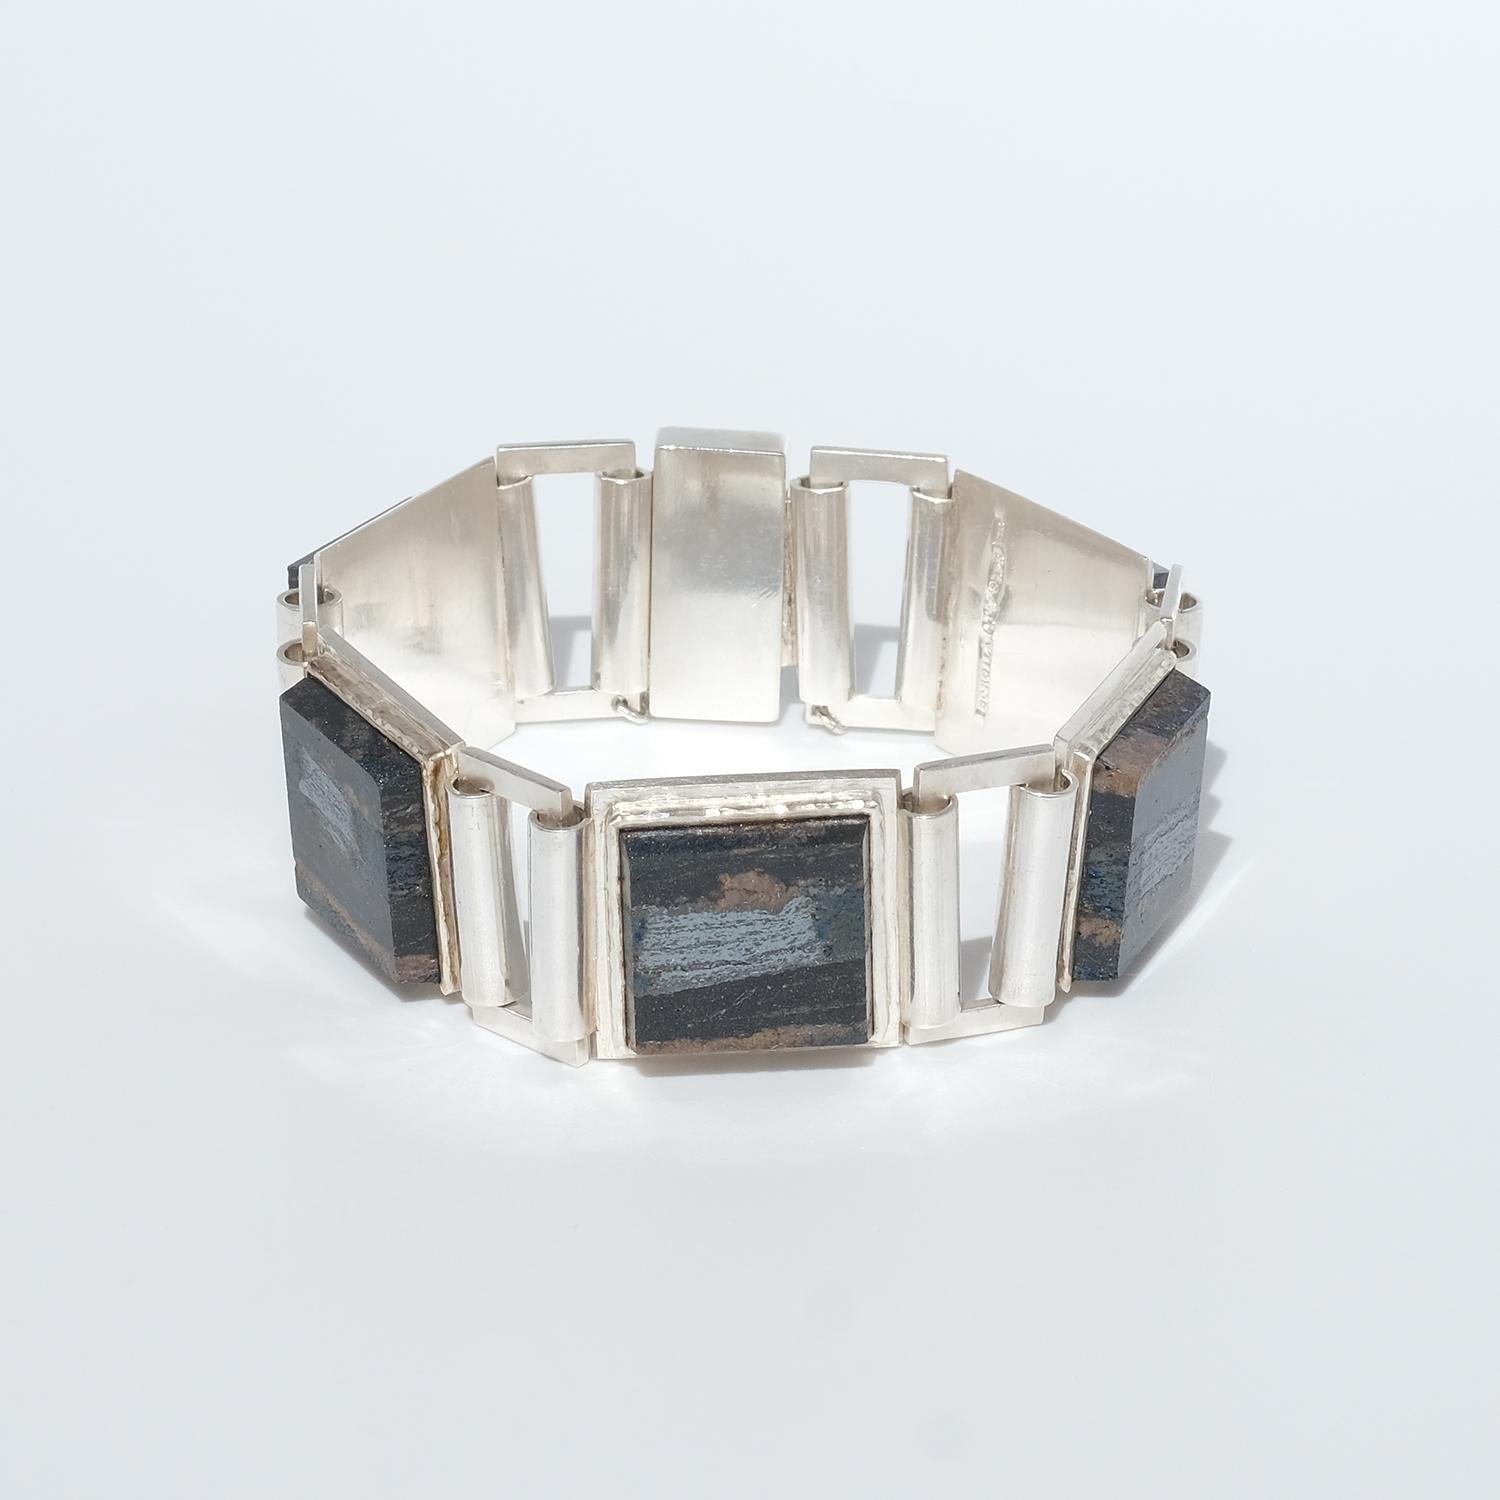 This bracelet is made with sterling silver and five square slate stones. The slate stones are linked together with silver rectangles. The bracelet closes easily with a box clasp which has a safety chain. The slate stone's dark and shimmering